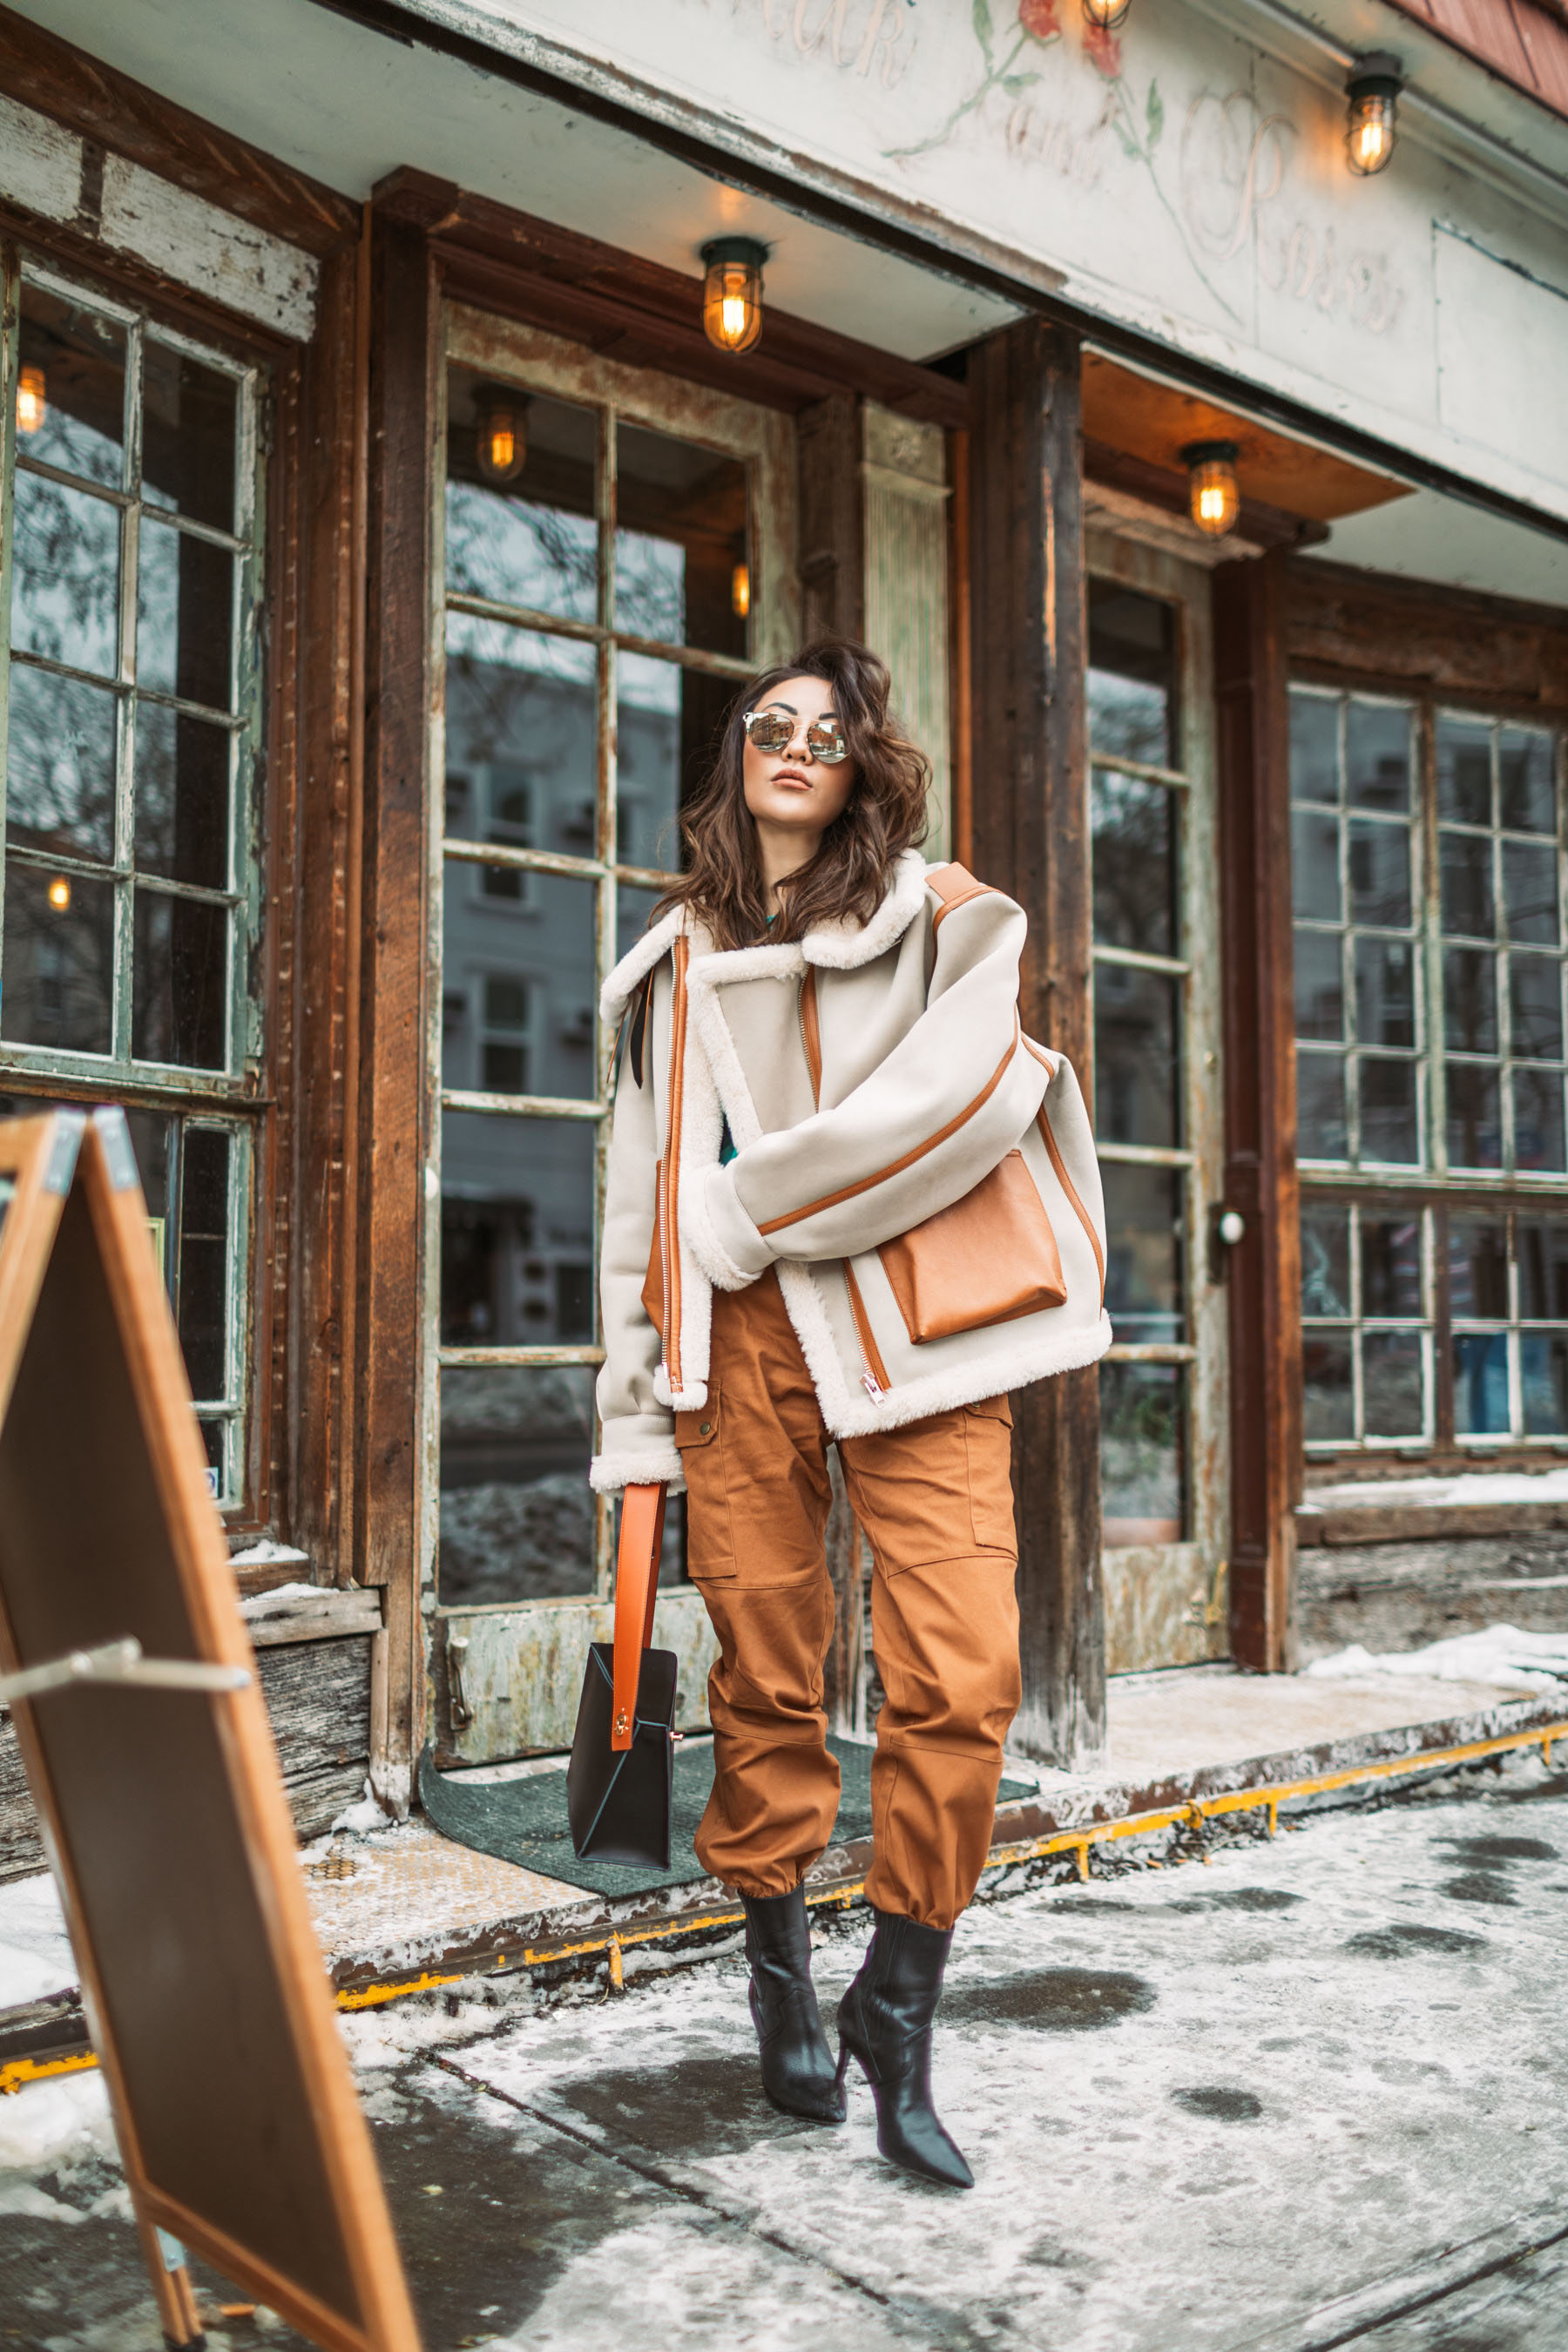 Instagram Outfits Round Up // Notjessfashion.com // Cozy Layered looks, jessica wang, fashion blogger, new york fashion blogger, street style fashion, ootd, mirrored sunglasses, aviator jacket, shearling jacket, trendy style, cozy winter look